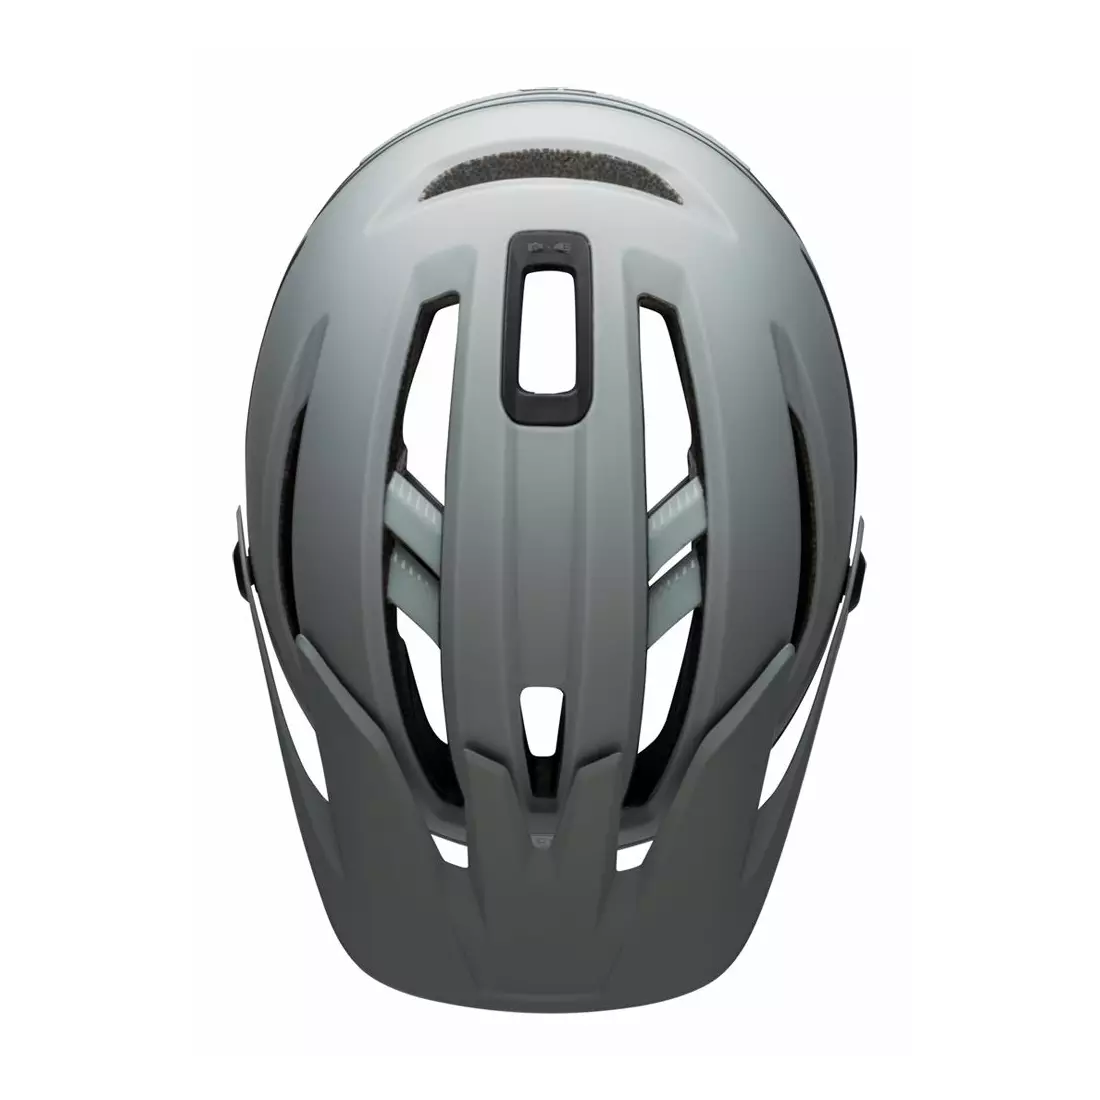 BELL kask rowerowy mtb SIXER INTEGRATED MIPS, matte gloss grays 